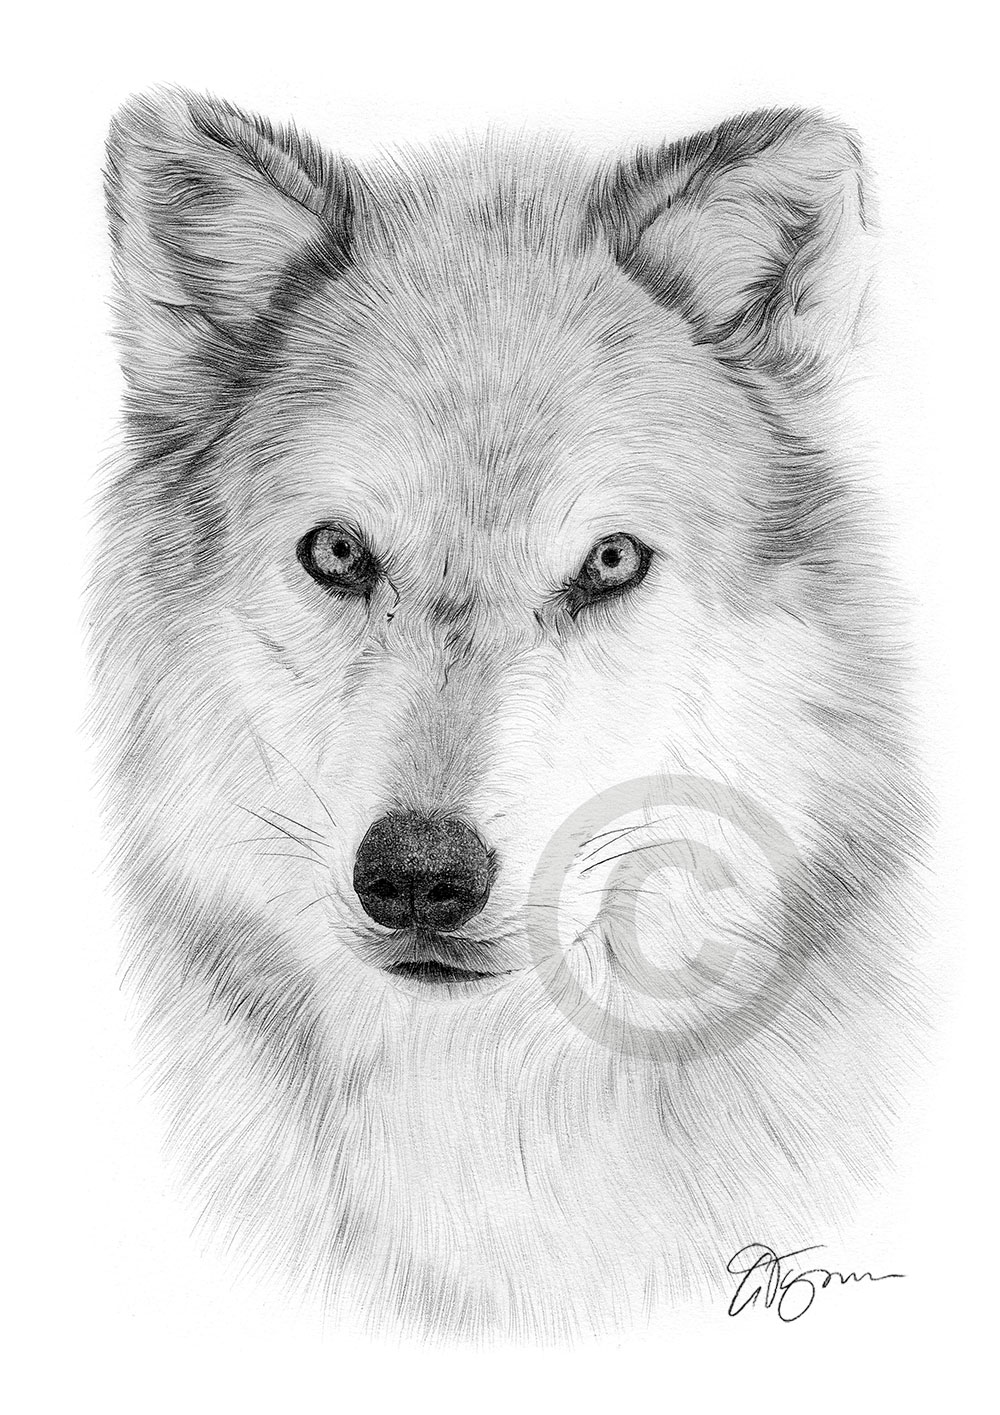 Pencil drawing of an Arctic wolf by artist Gary Tymon